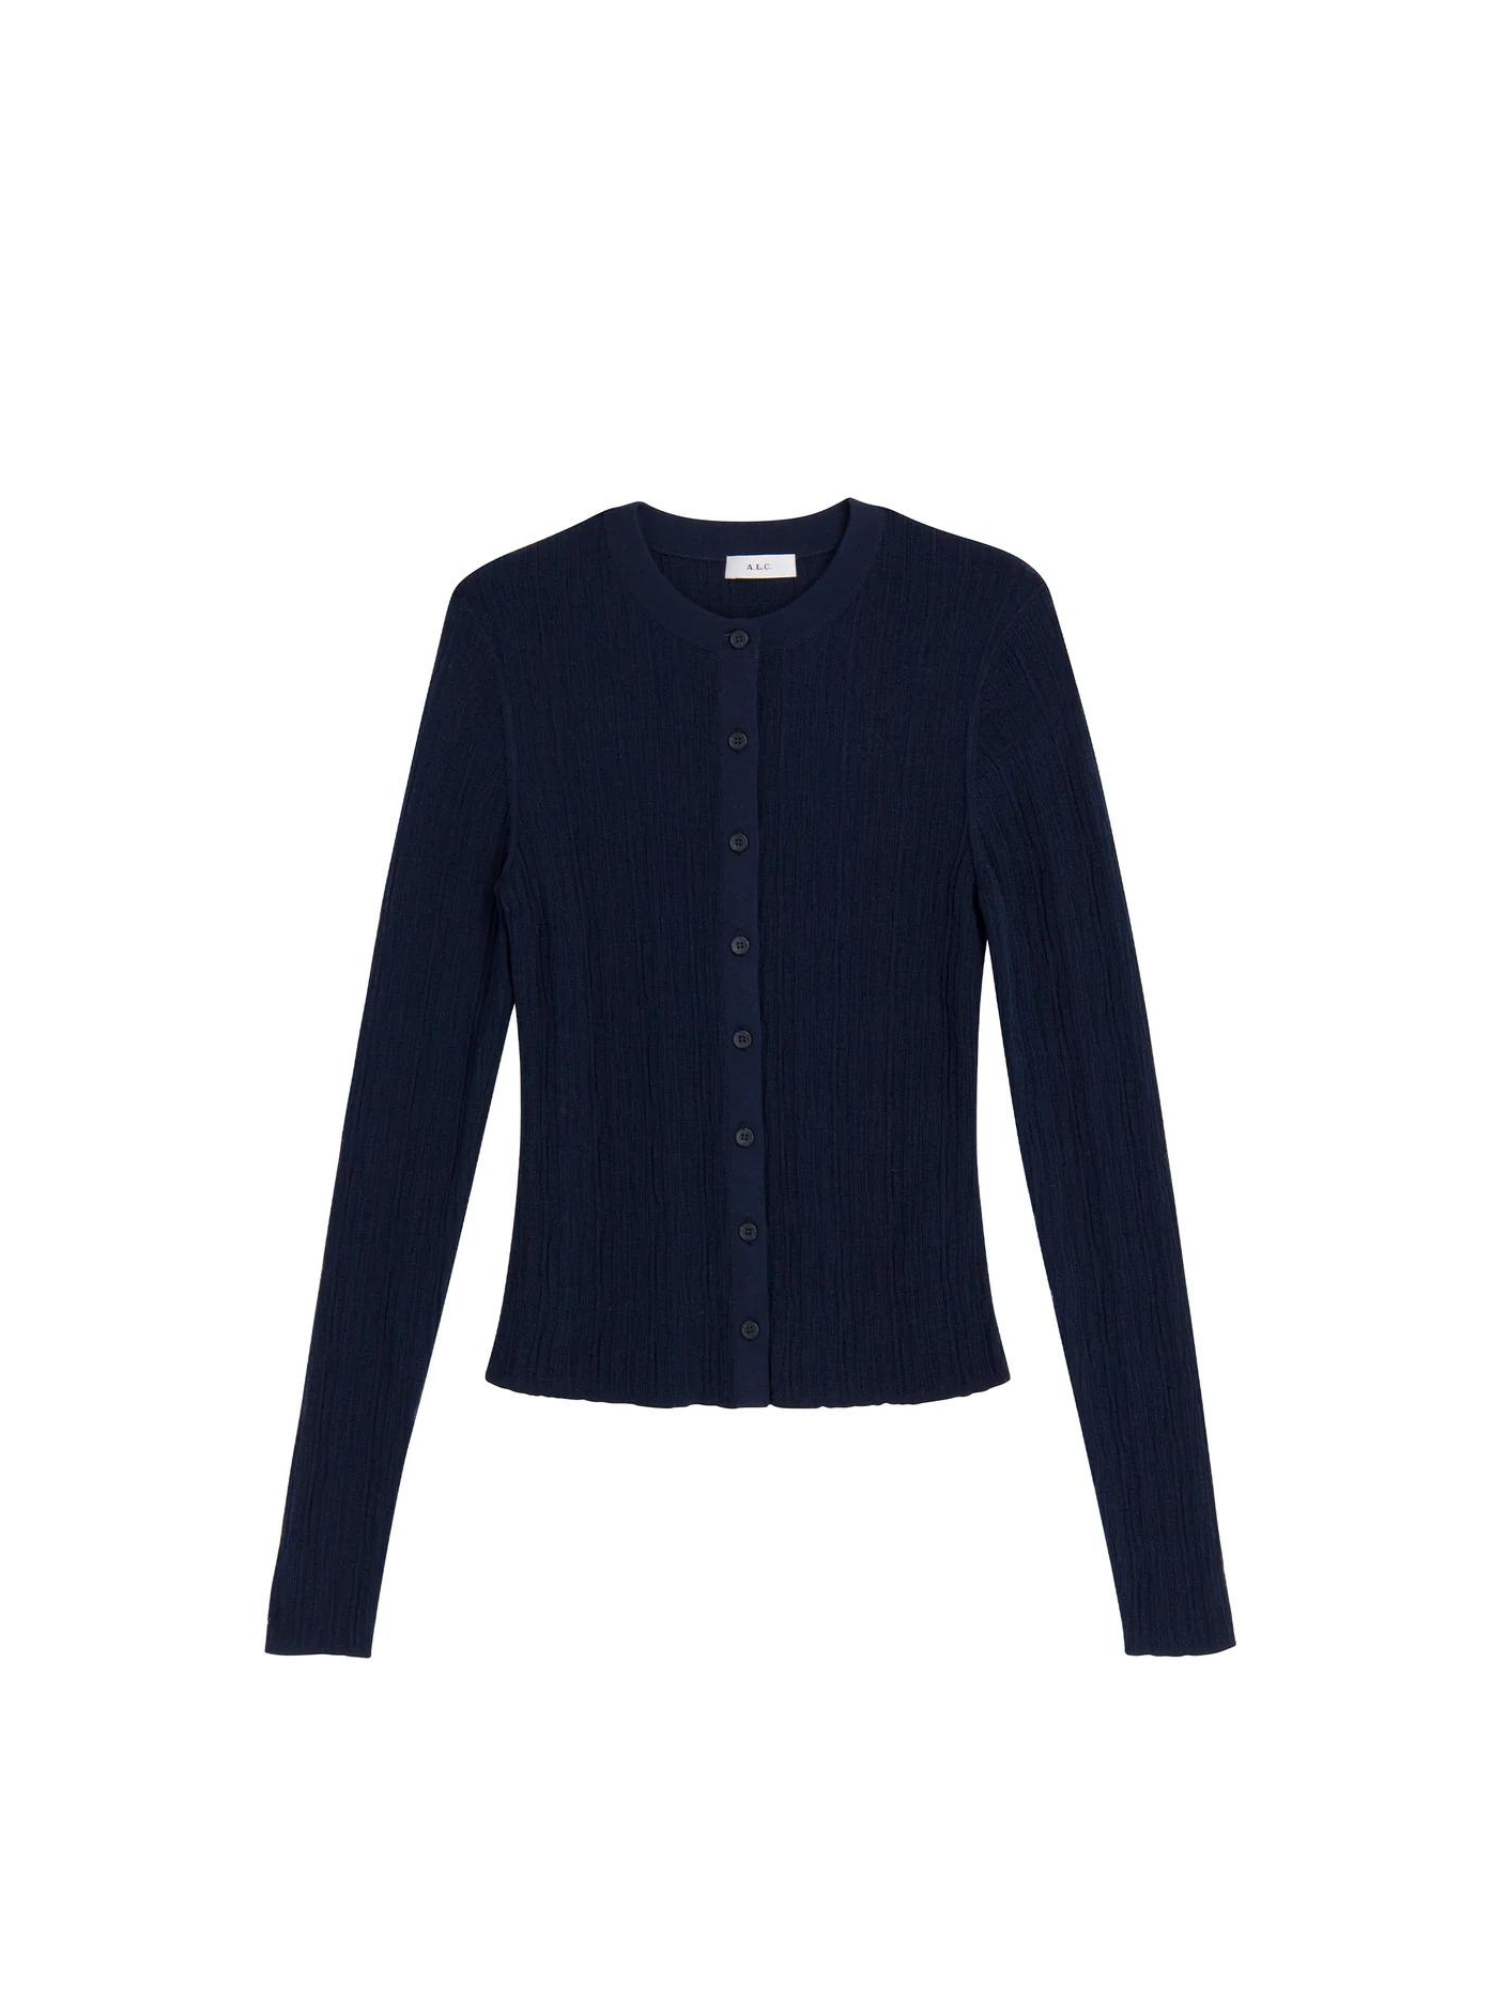 A.L.C. Fisher Cardigan in Navy